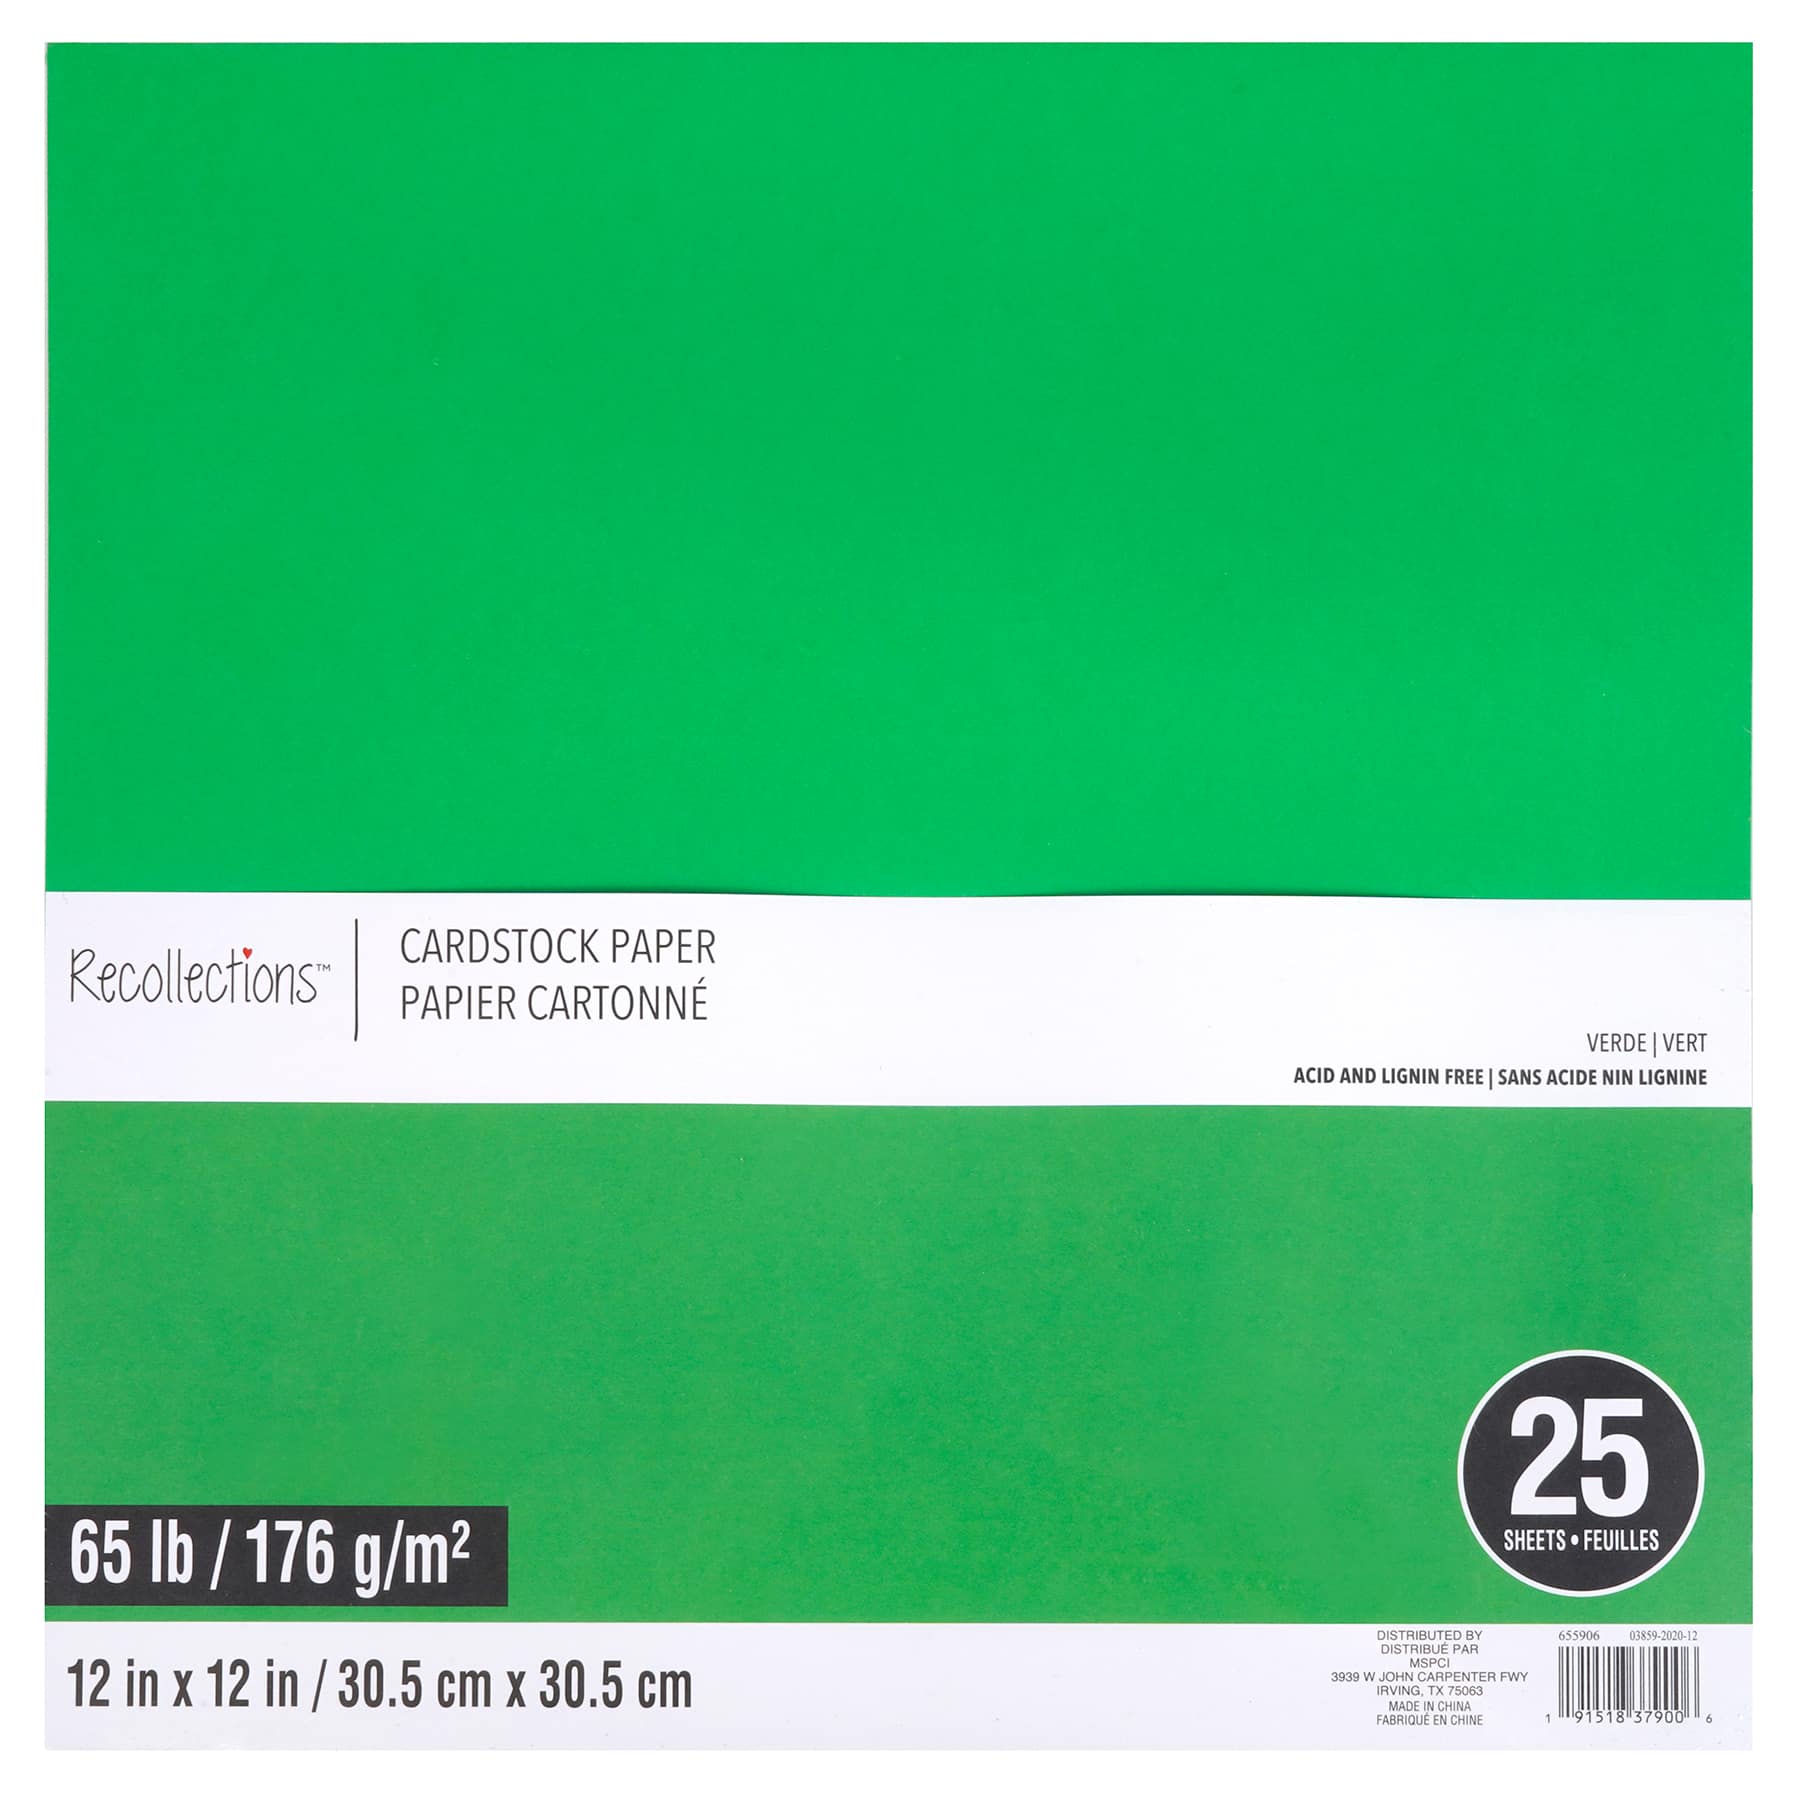 Bright Essentials 12 x 12 Cardstock Paper Pack by Recollections™, 100  Sheets